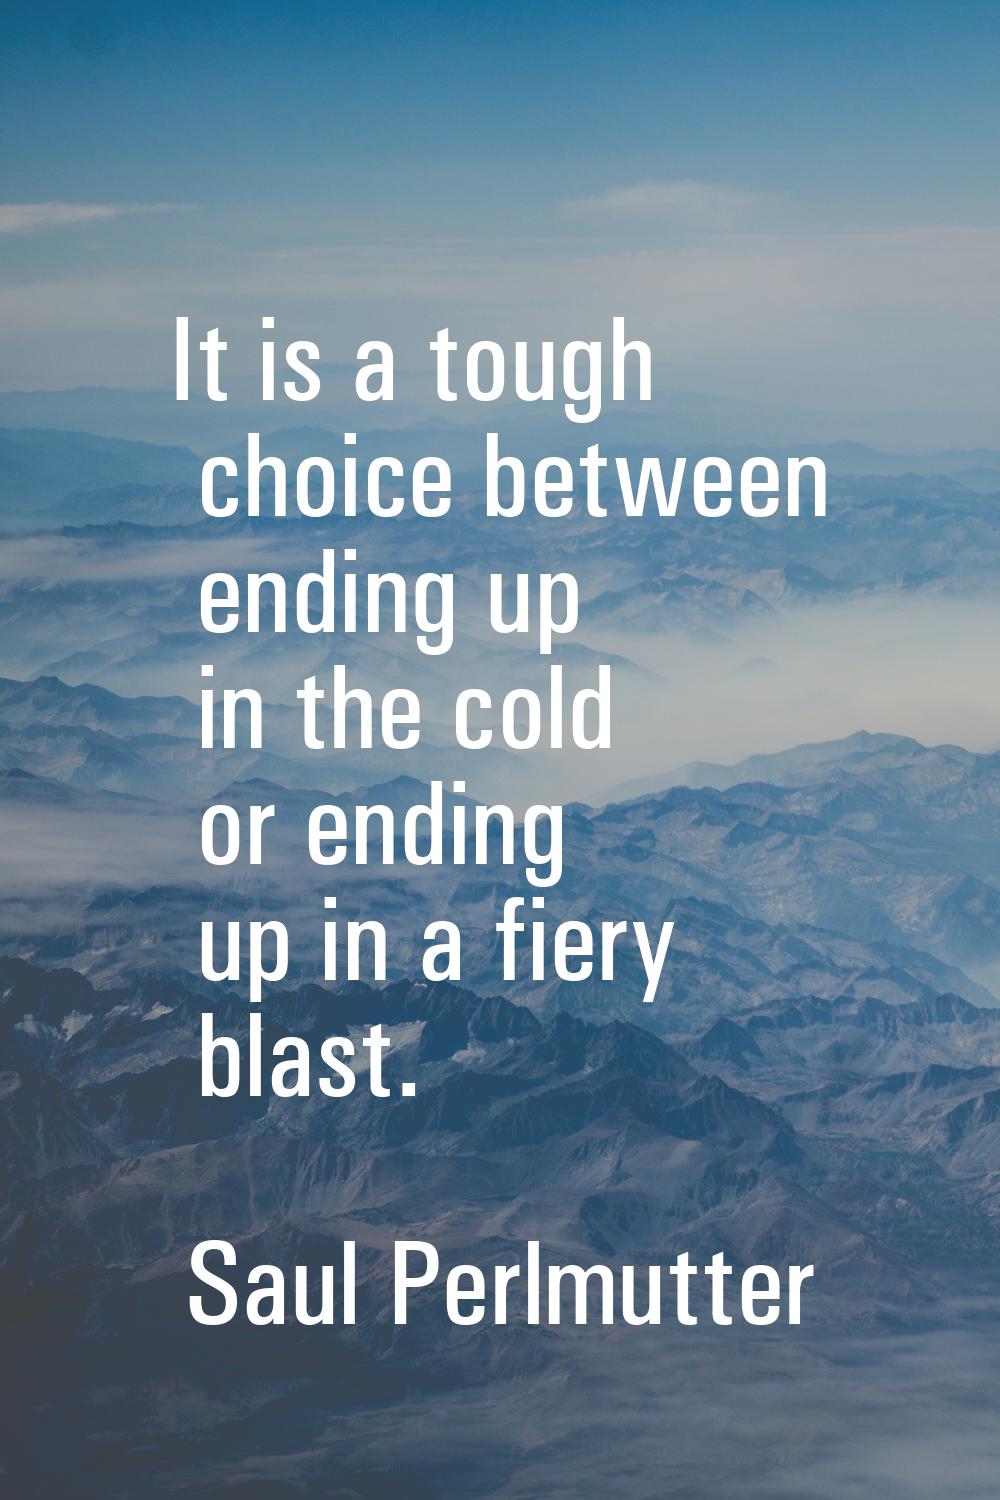 It is a tough choice between ending up in the cold or ending up in a fiery blast.